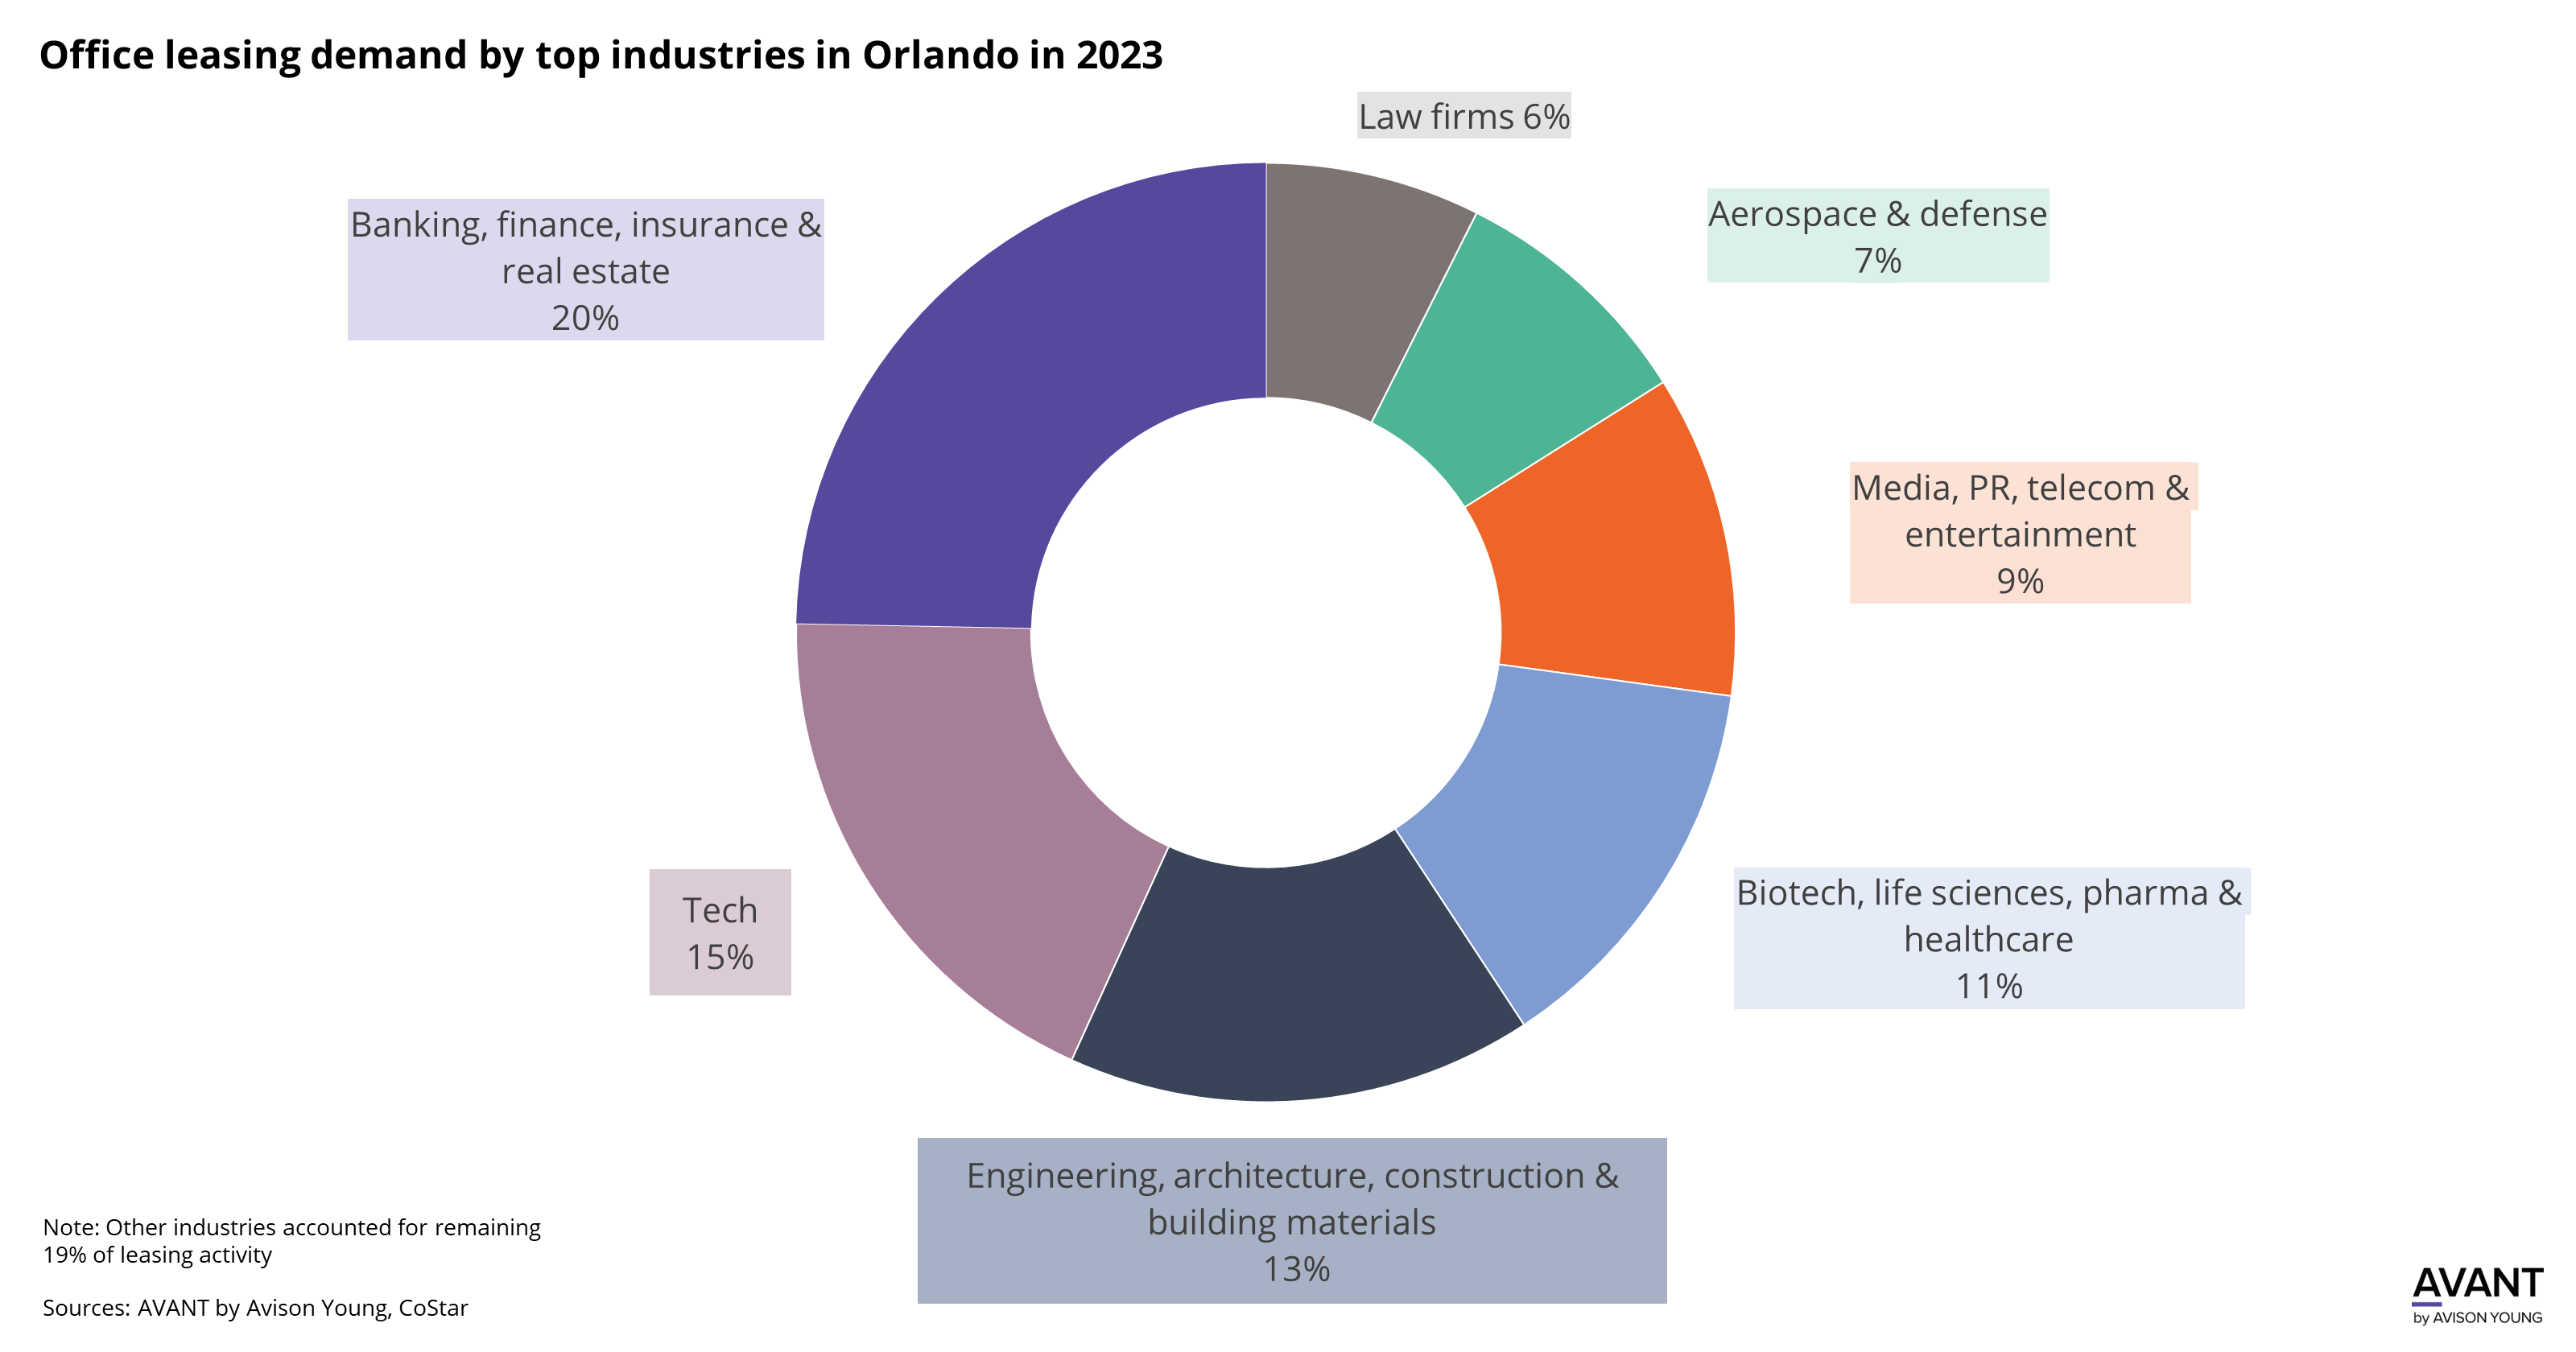 pie chart of office leasing demand of top industries in Orlando by percentage as Q4 2023